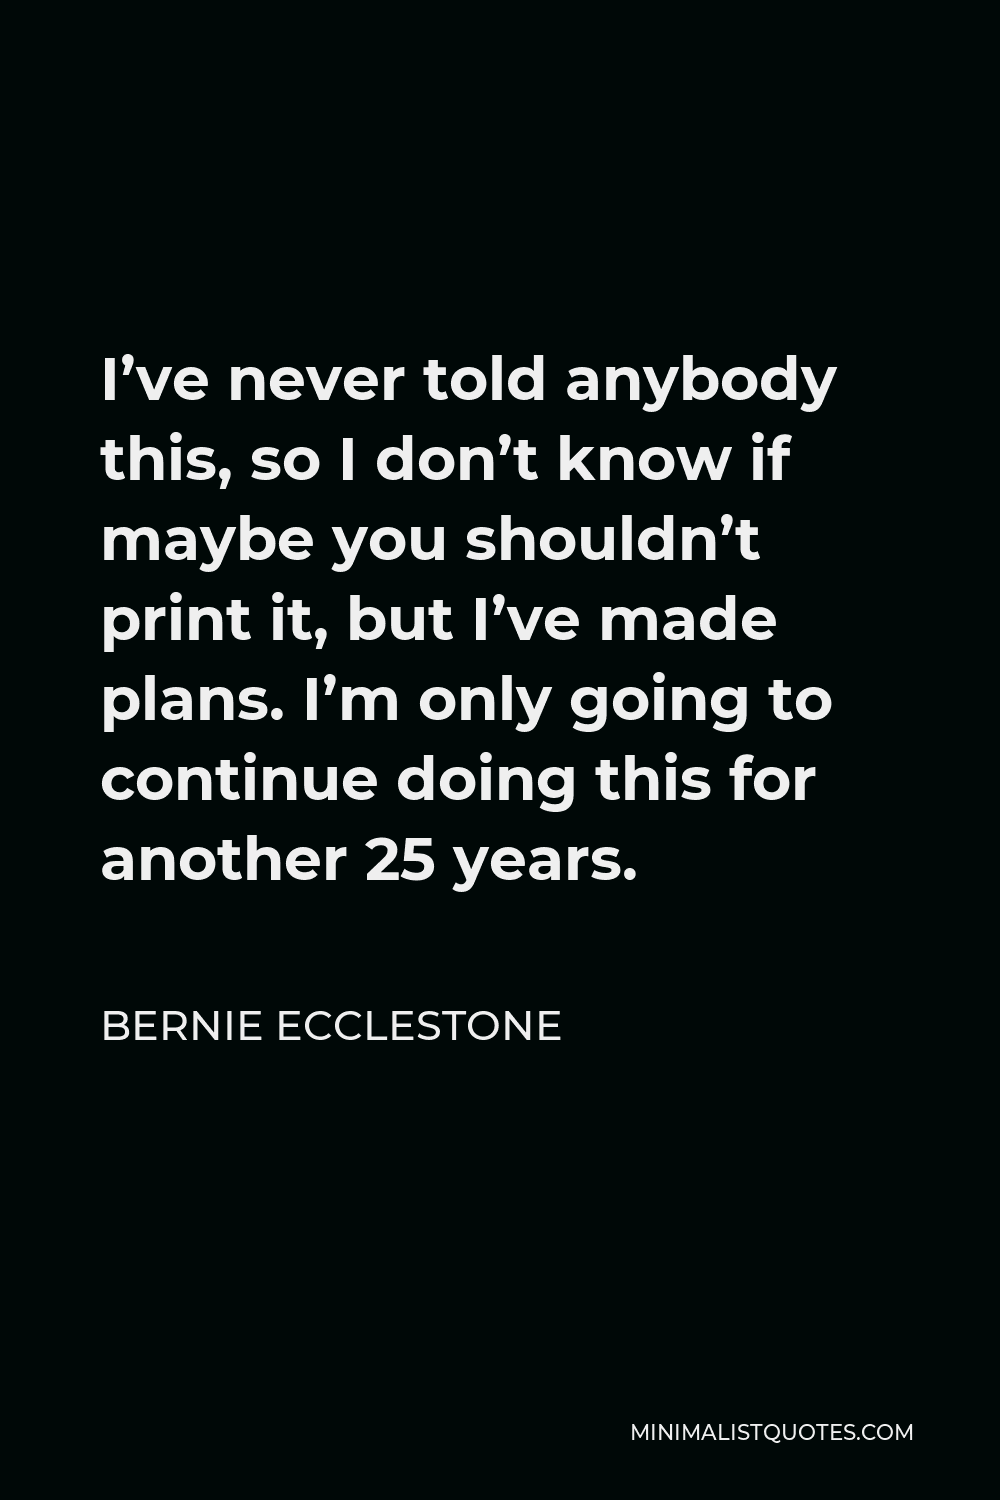 Bernie Ecclestone Quote - I’ve never told anybody this, so I don’t know if maybe you shouldn’t print it, but I’ve made plans. I’m only going to continue doing this for another 25 years.